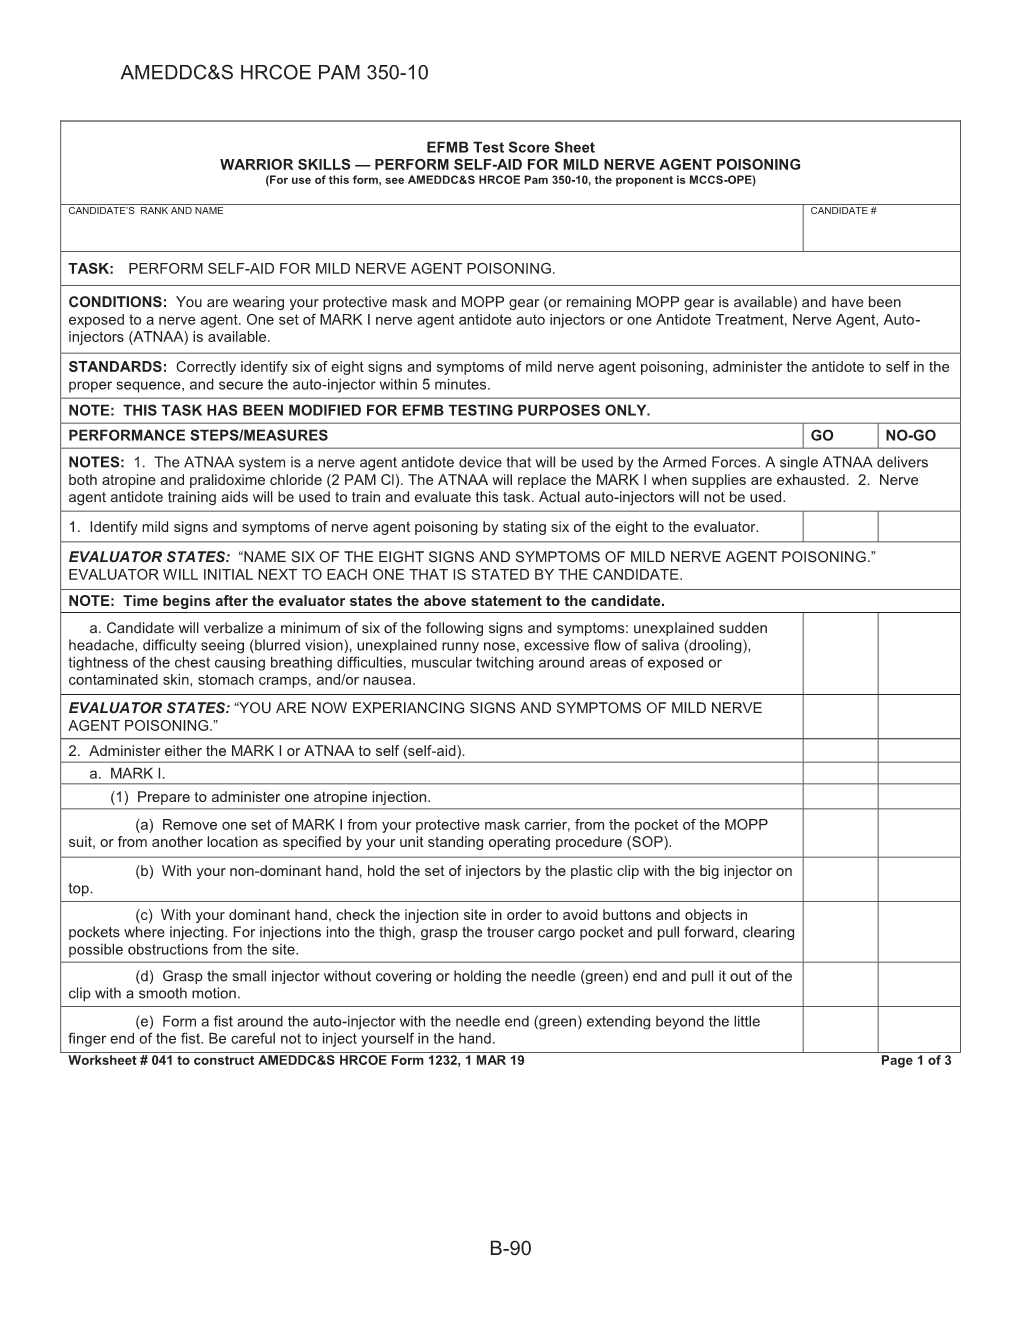 PERFORM SELF-AID for MILD NERVE AGENT POISONING (For Use of This Form, See AMEDDC&S HRCOE Pam 350-10, the Proponent Is MCCS-OPE)